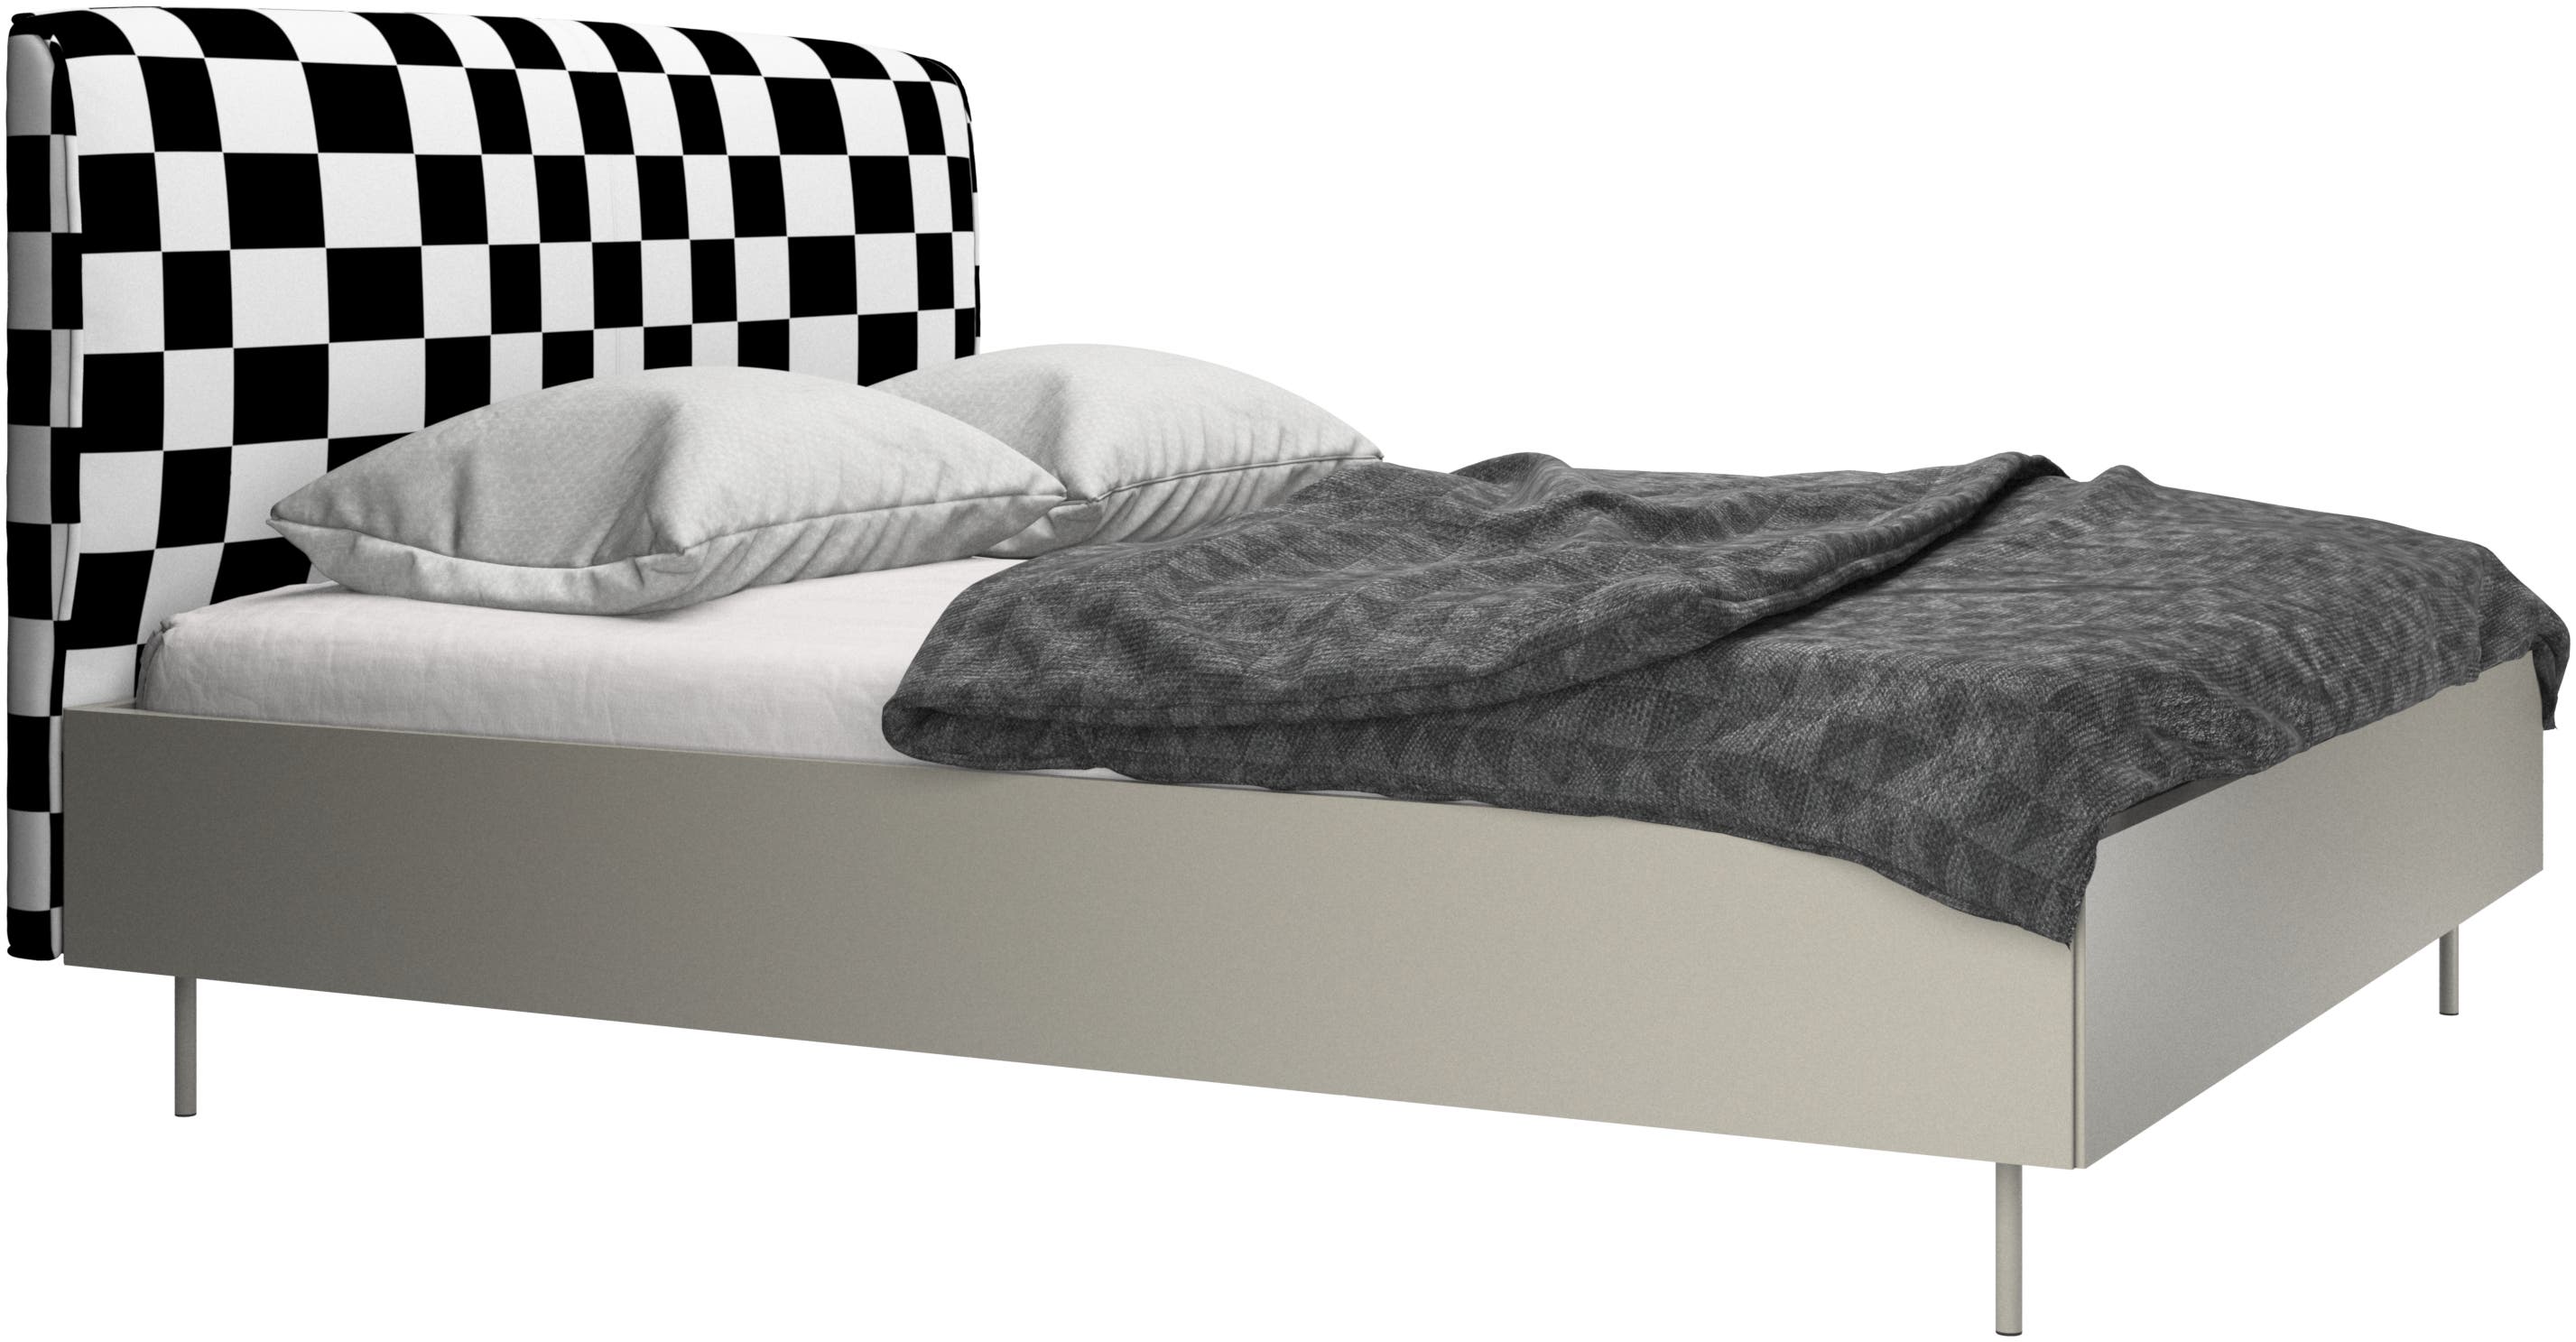 Houston bed, excl. mattress